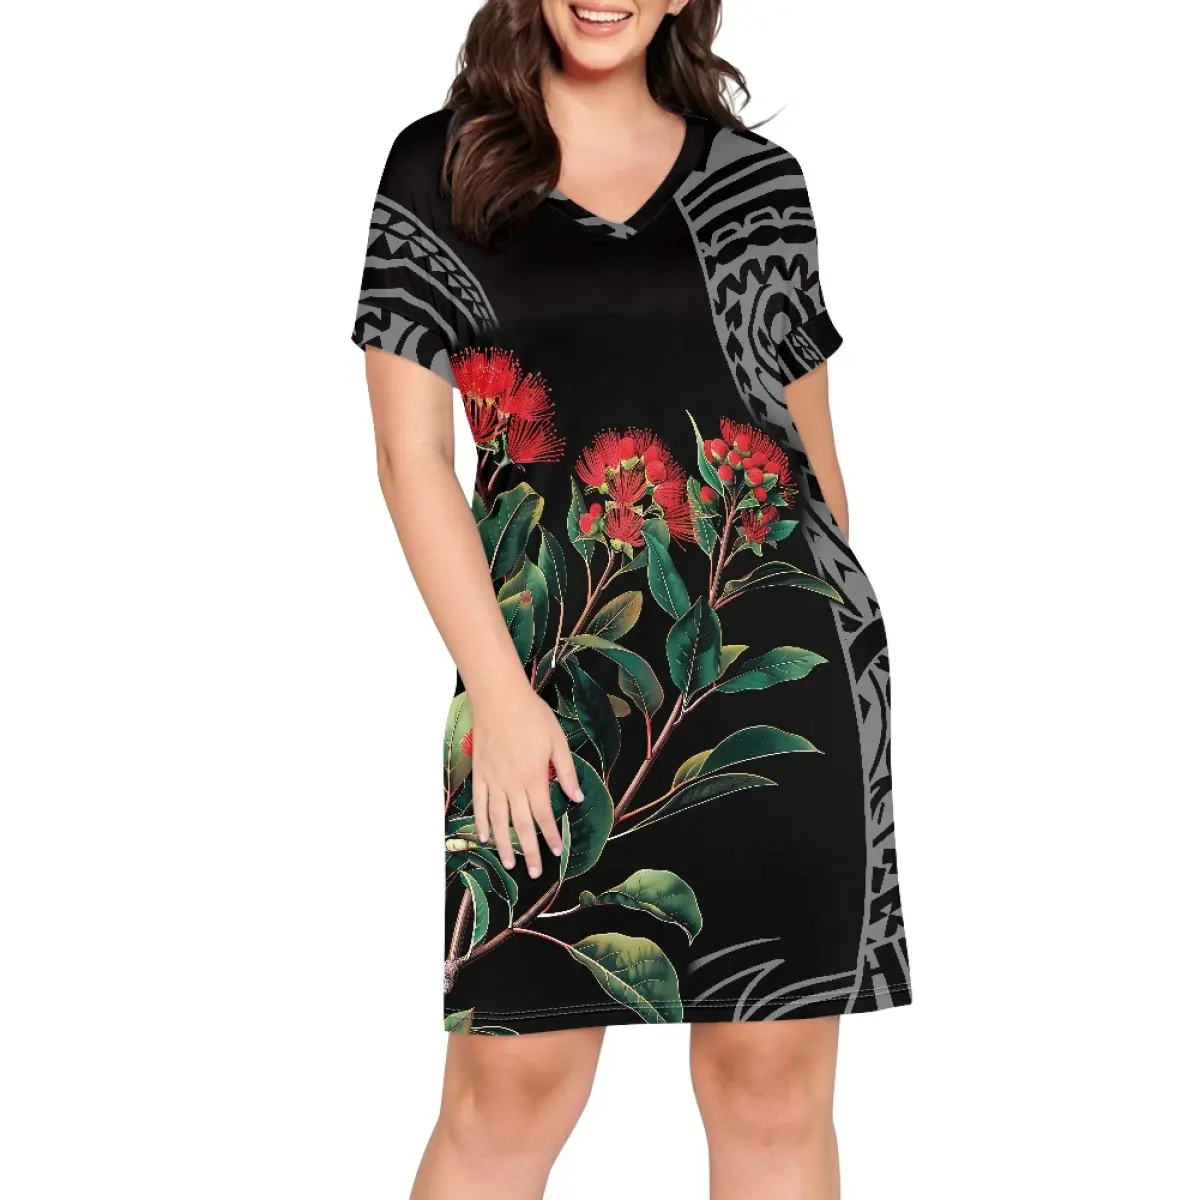 Pohutukawa Flowers Designs Dresses Wholesale Breathable And Comfortable Women Dresses V-Neck Short-Sleeved Quick-Drying Garment